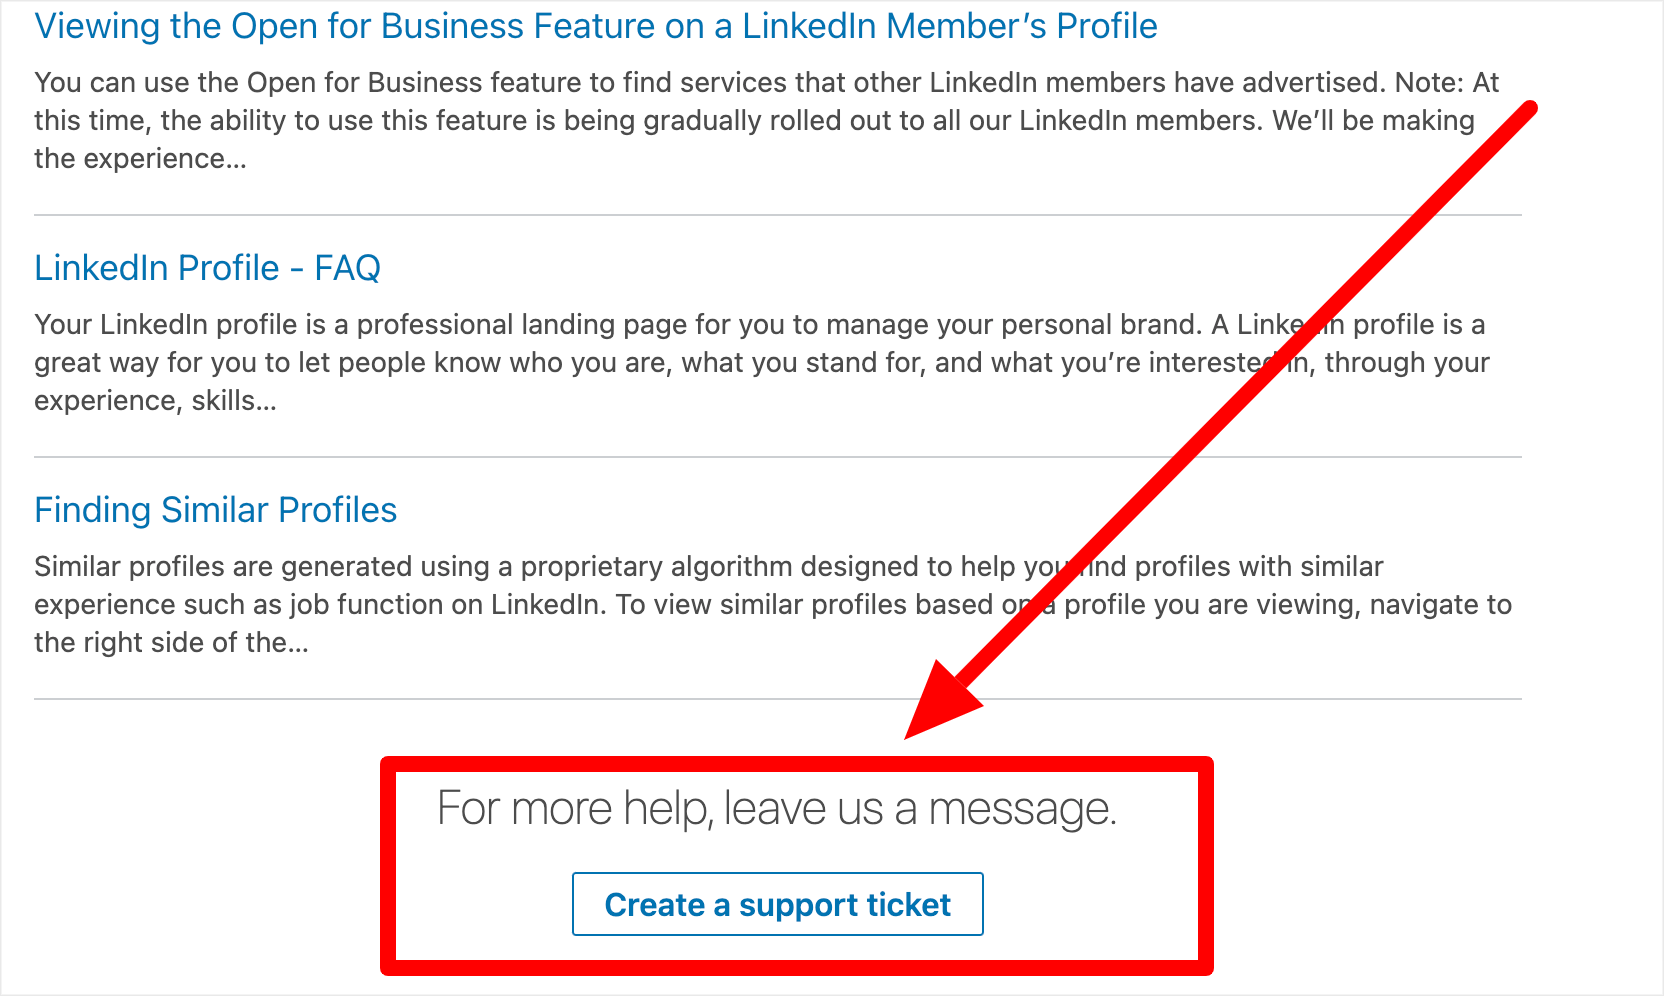 Location Of The Create A Support Ticket Button on LinkedIn